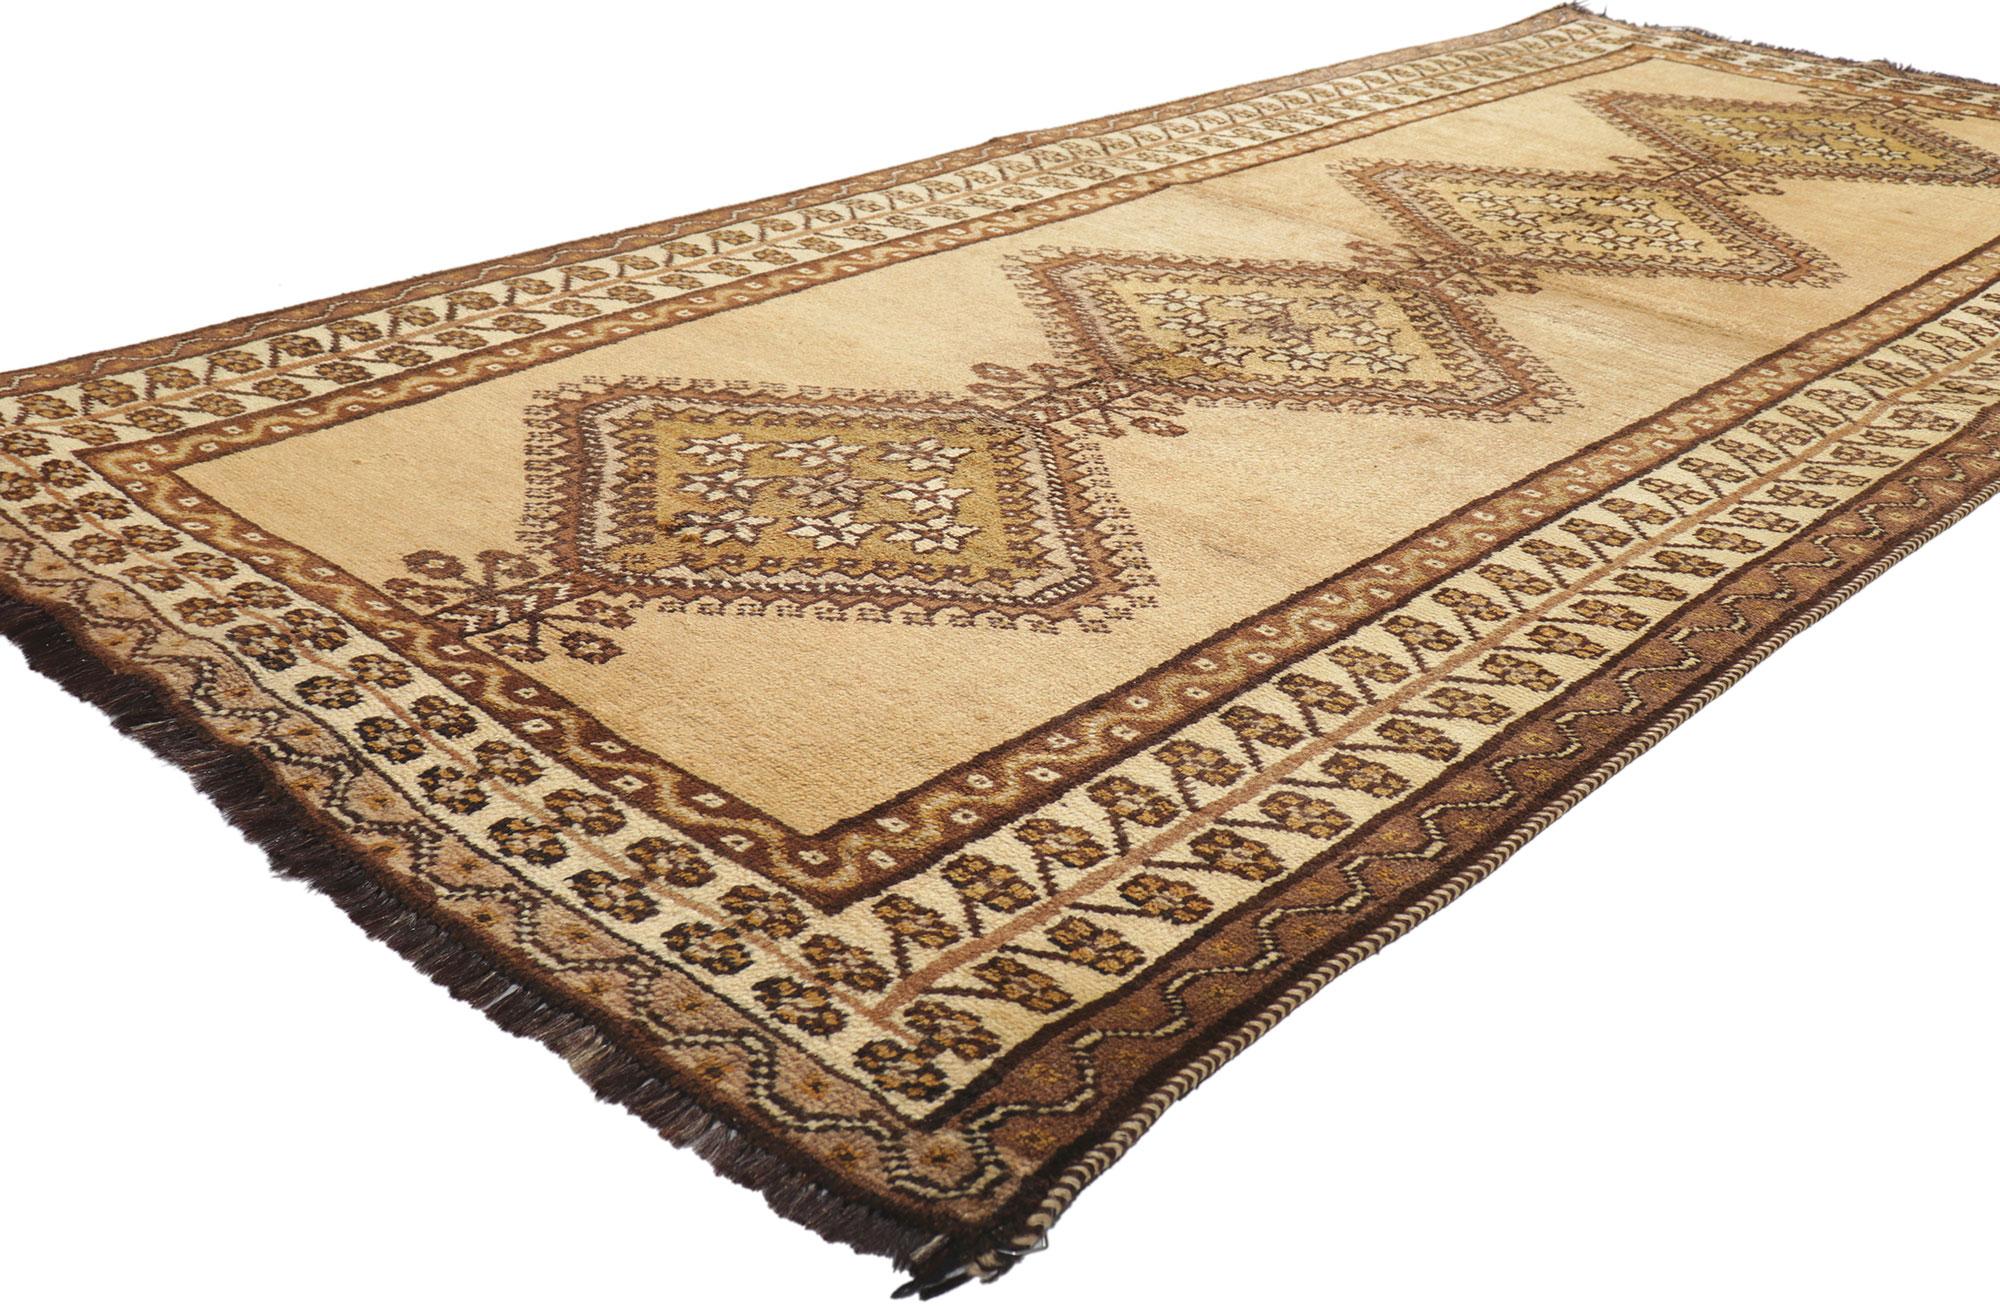 75056 Vintage Persian Shiraz Tribal Rug, 03'10 x 08'06.
Emanating nomadic charm with incredible detail and texture, this hand knotted wool vintage Persian Shiraz rug is a captivating vision of woven beauty. The intricate geometric details and